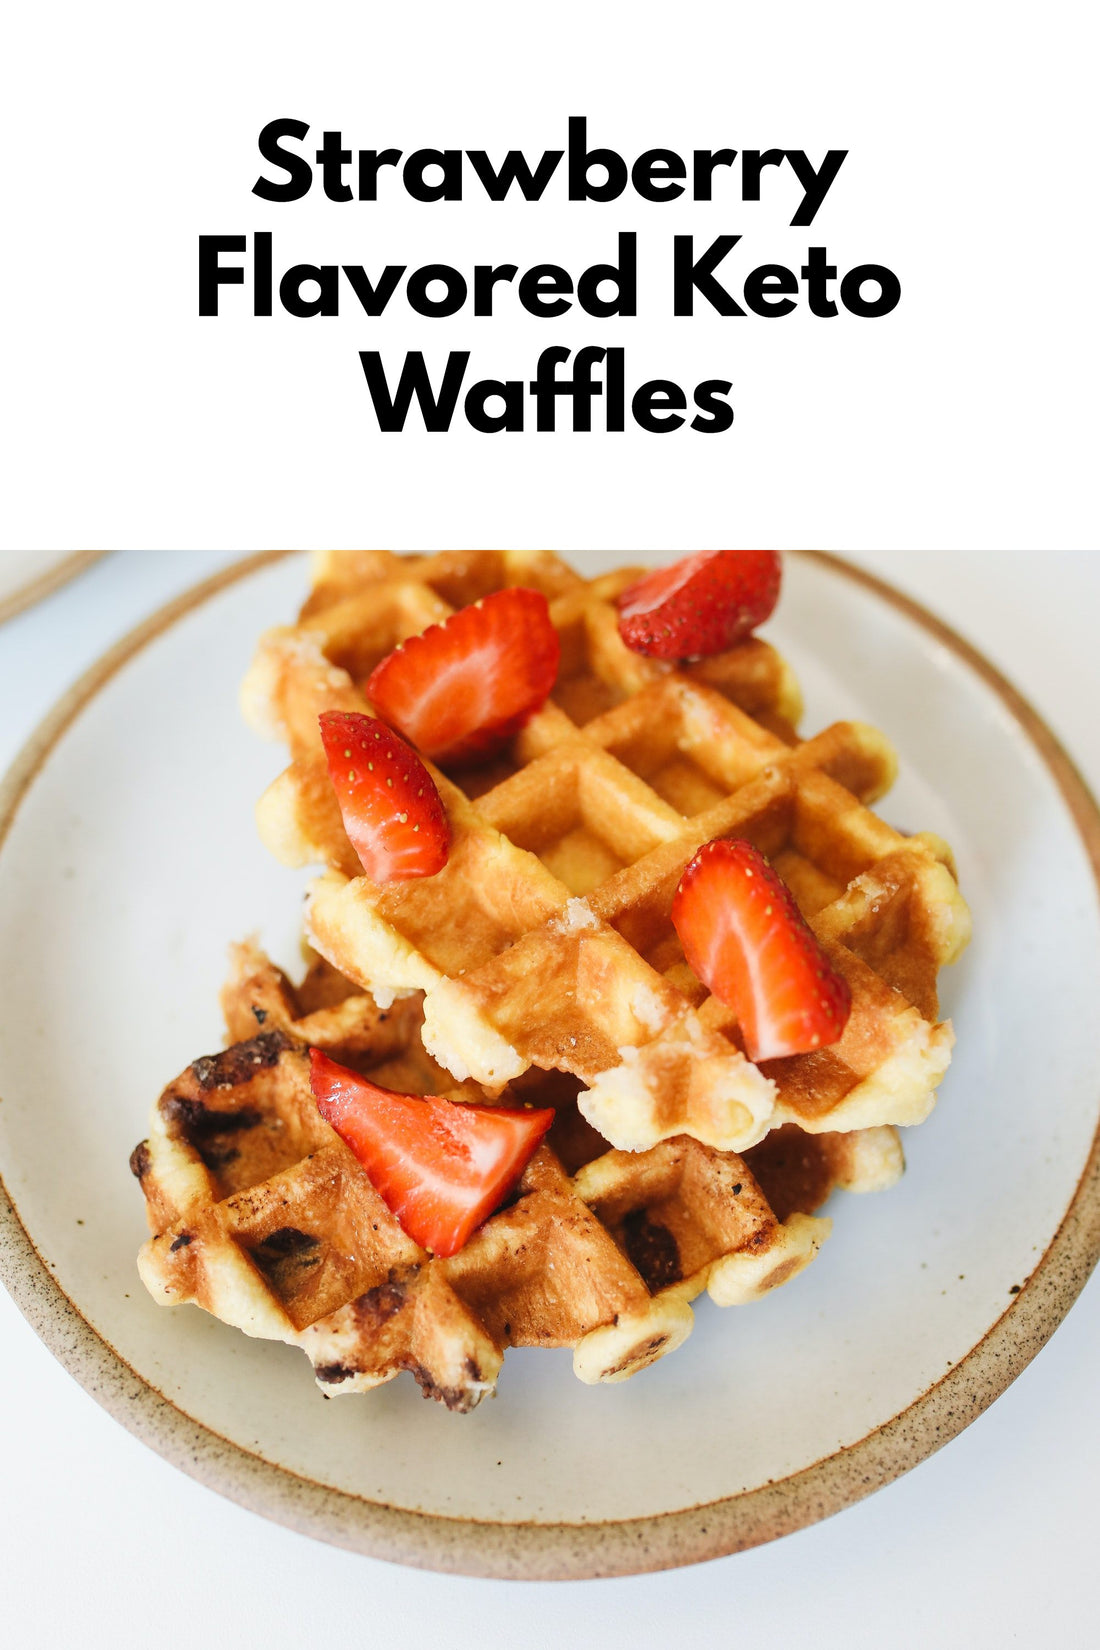 Scrumptious Strawberry Flavored Keto Waffles - Low Carb